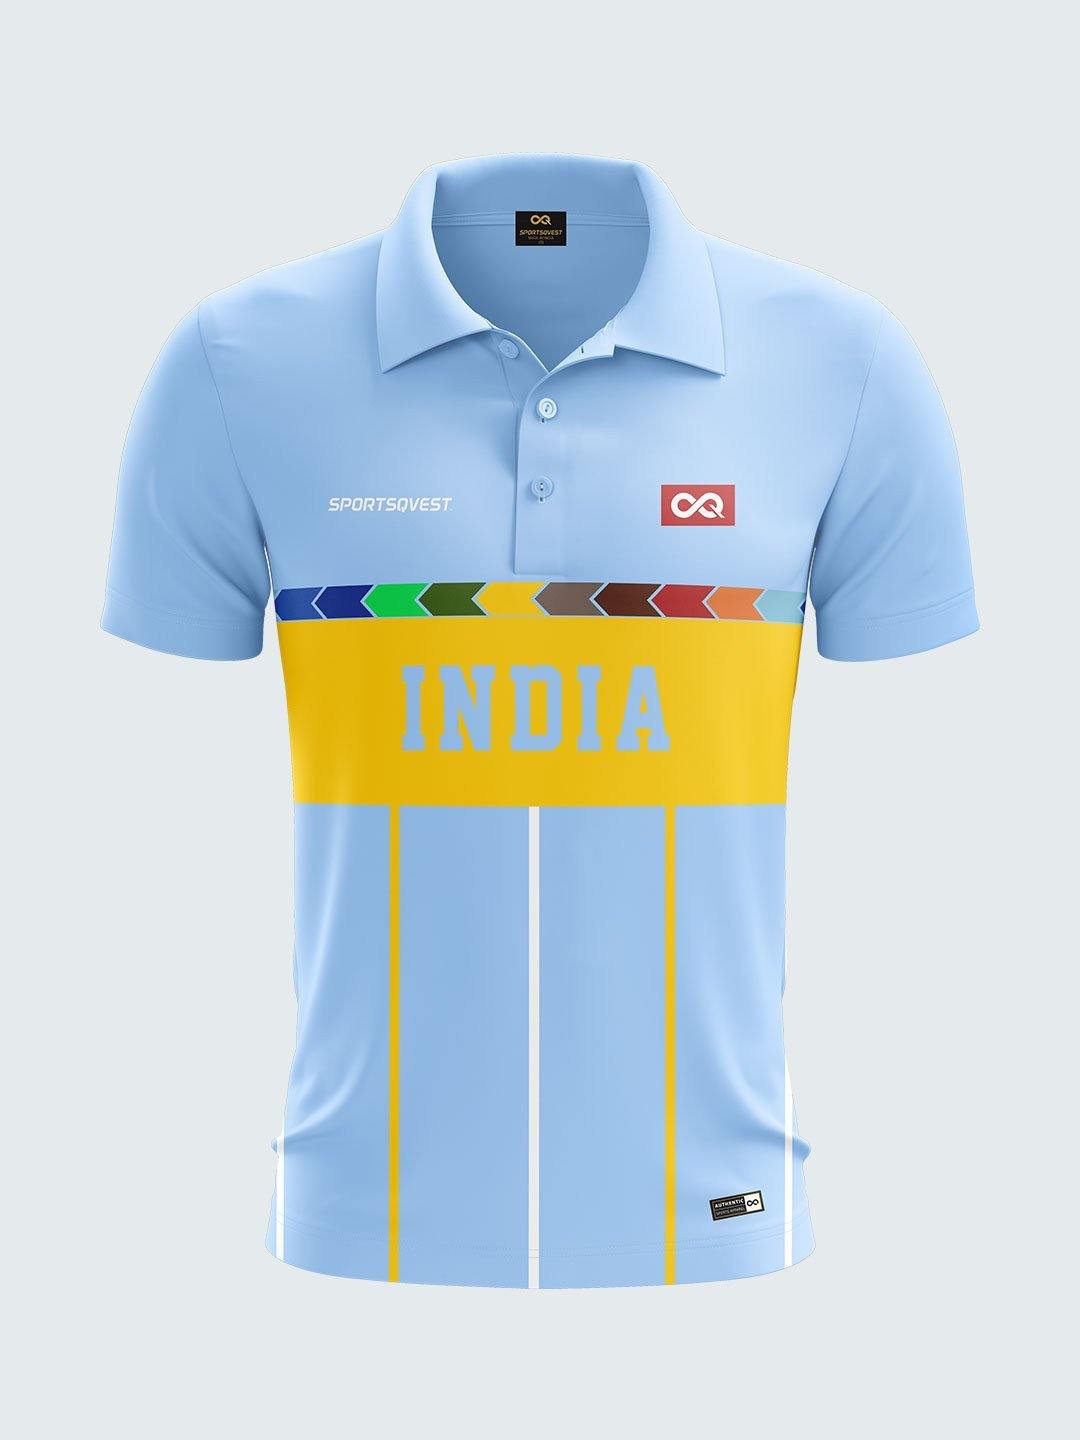 1996 cricket world cup jersey